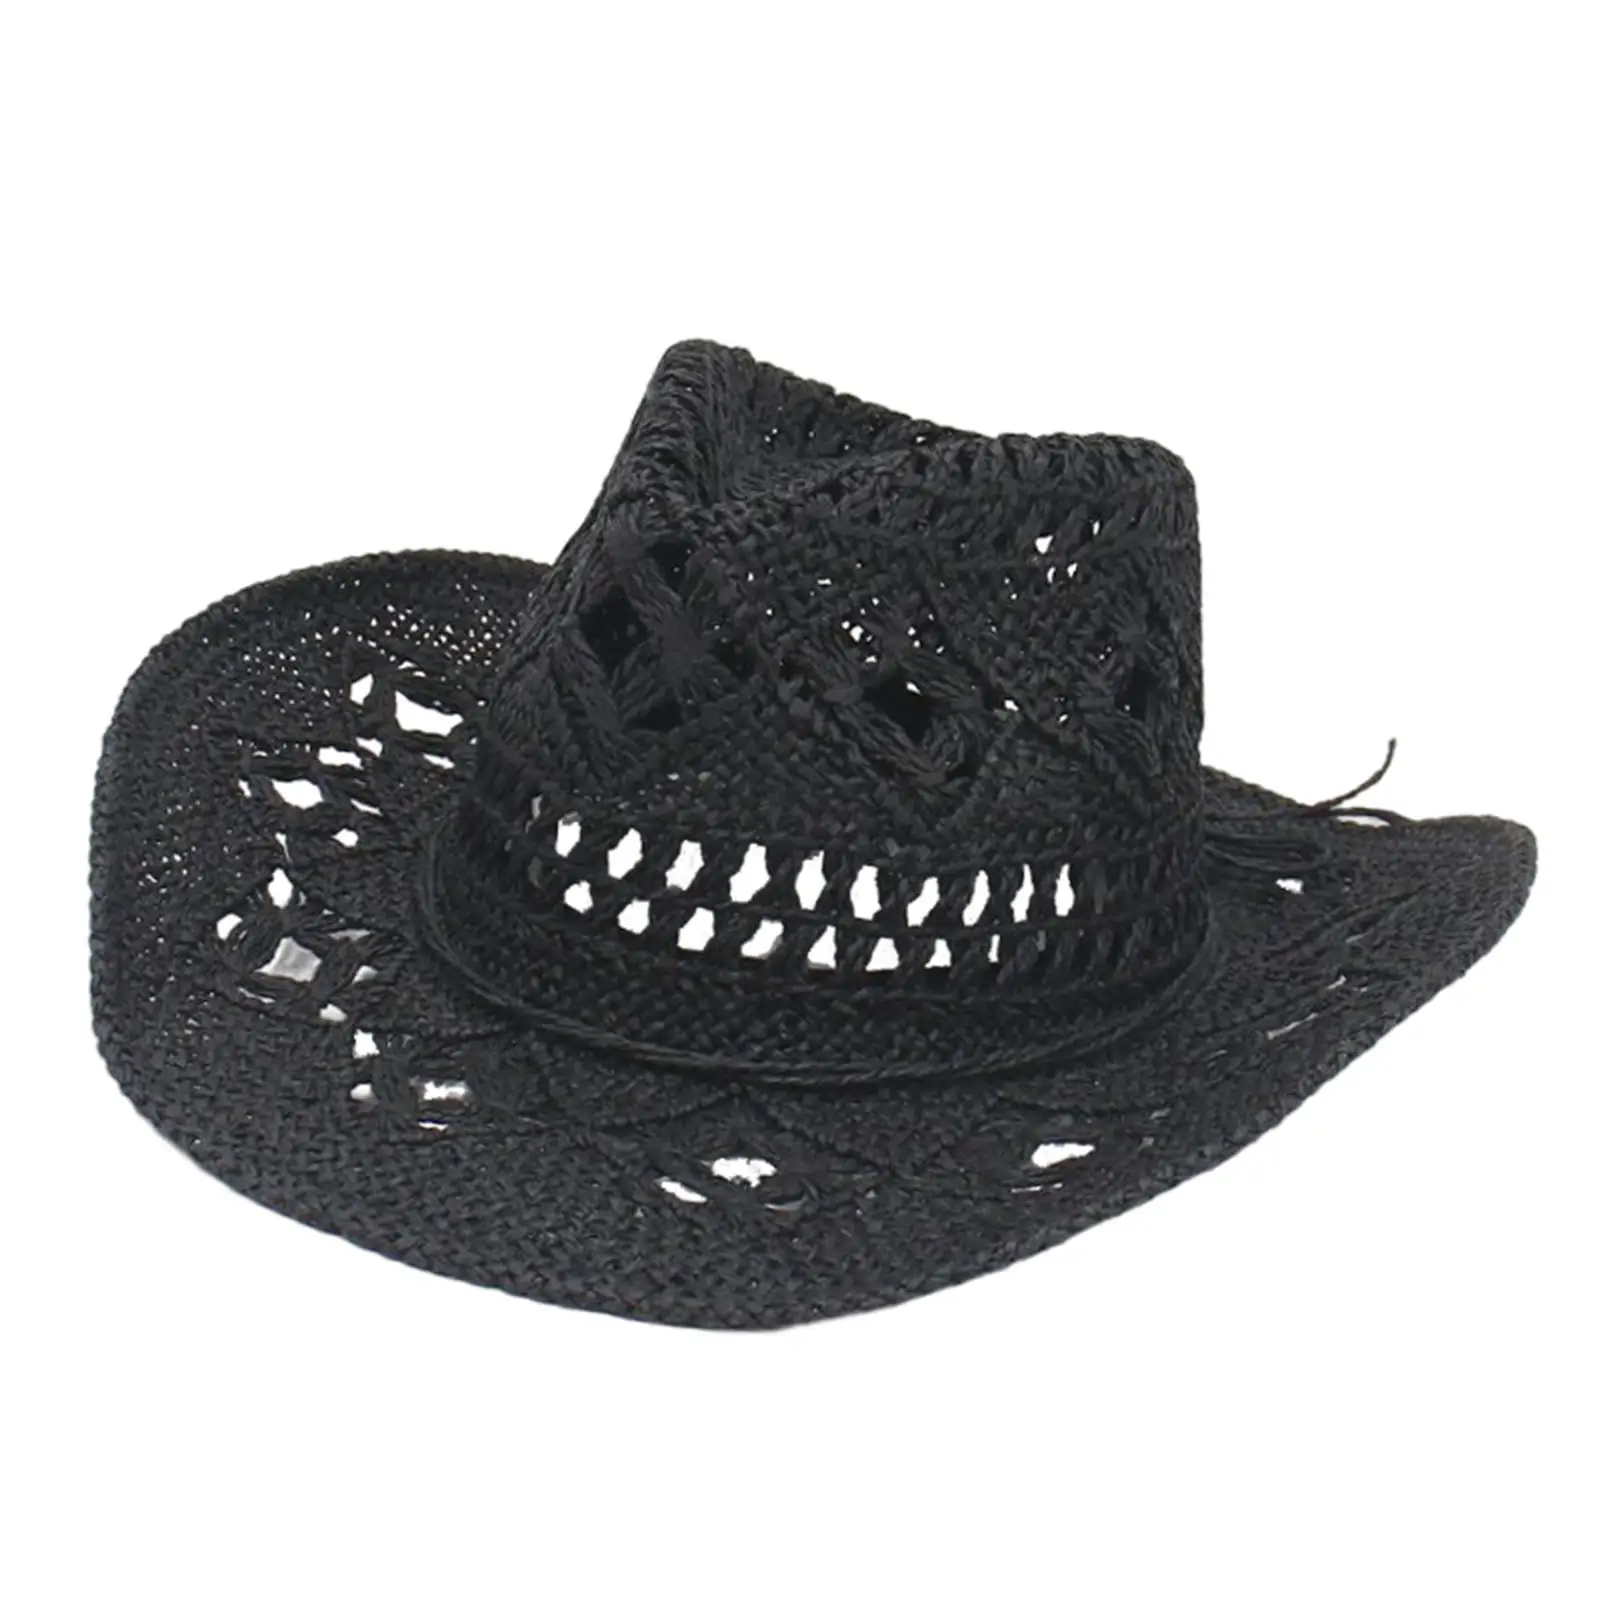 Straw Western Cowboy Hat Hand Woven Floppy Beach Hat for Vacation Outdoor